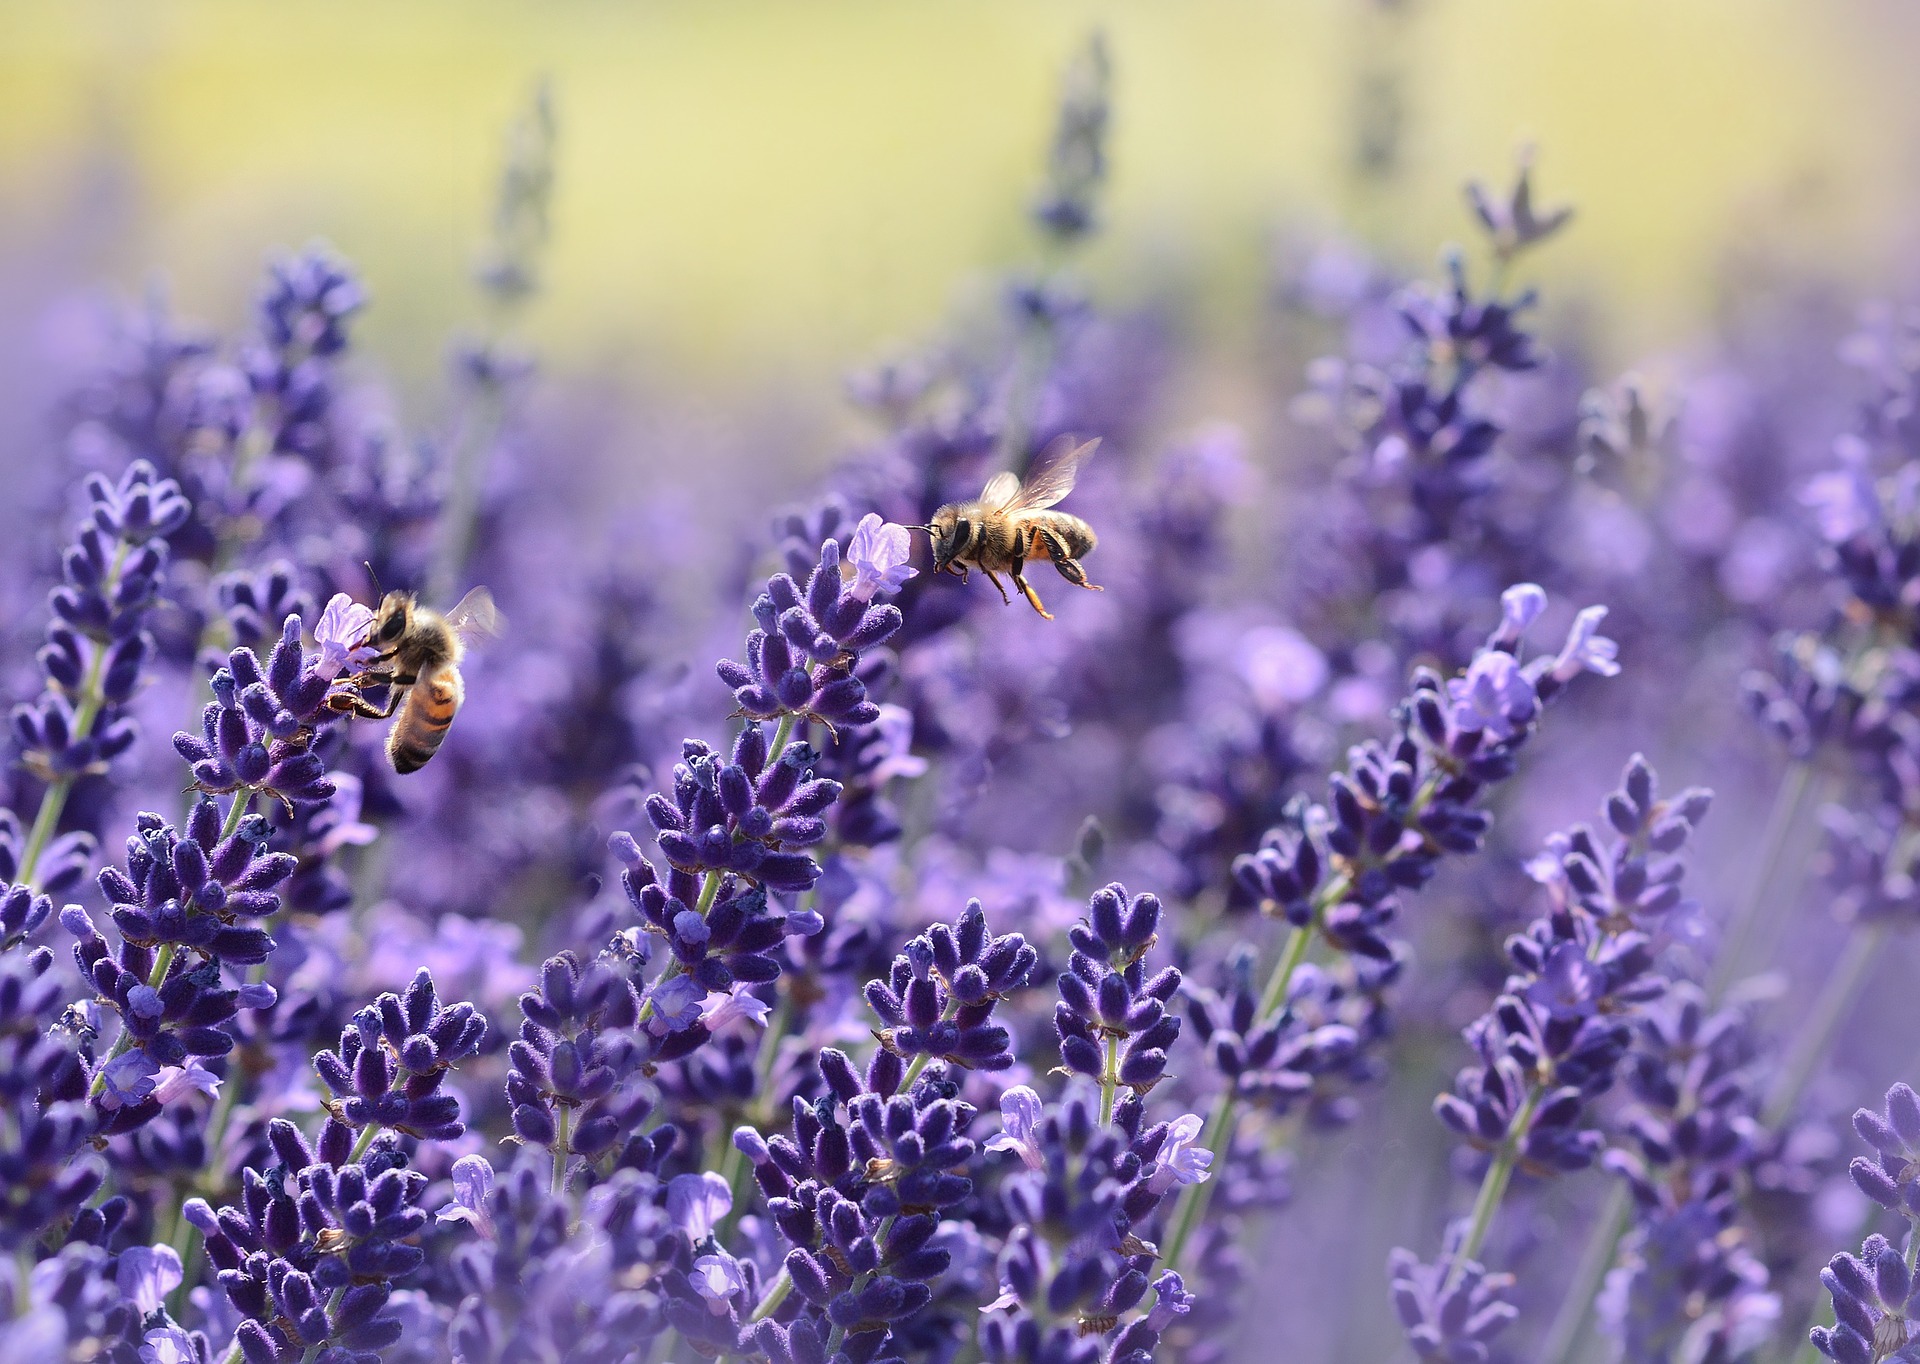 Bees on lavender flowers.